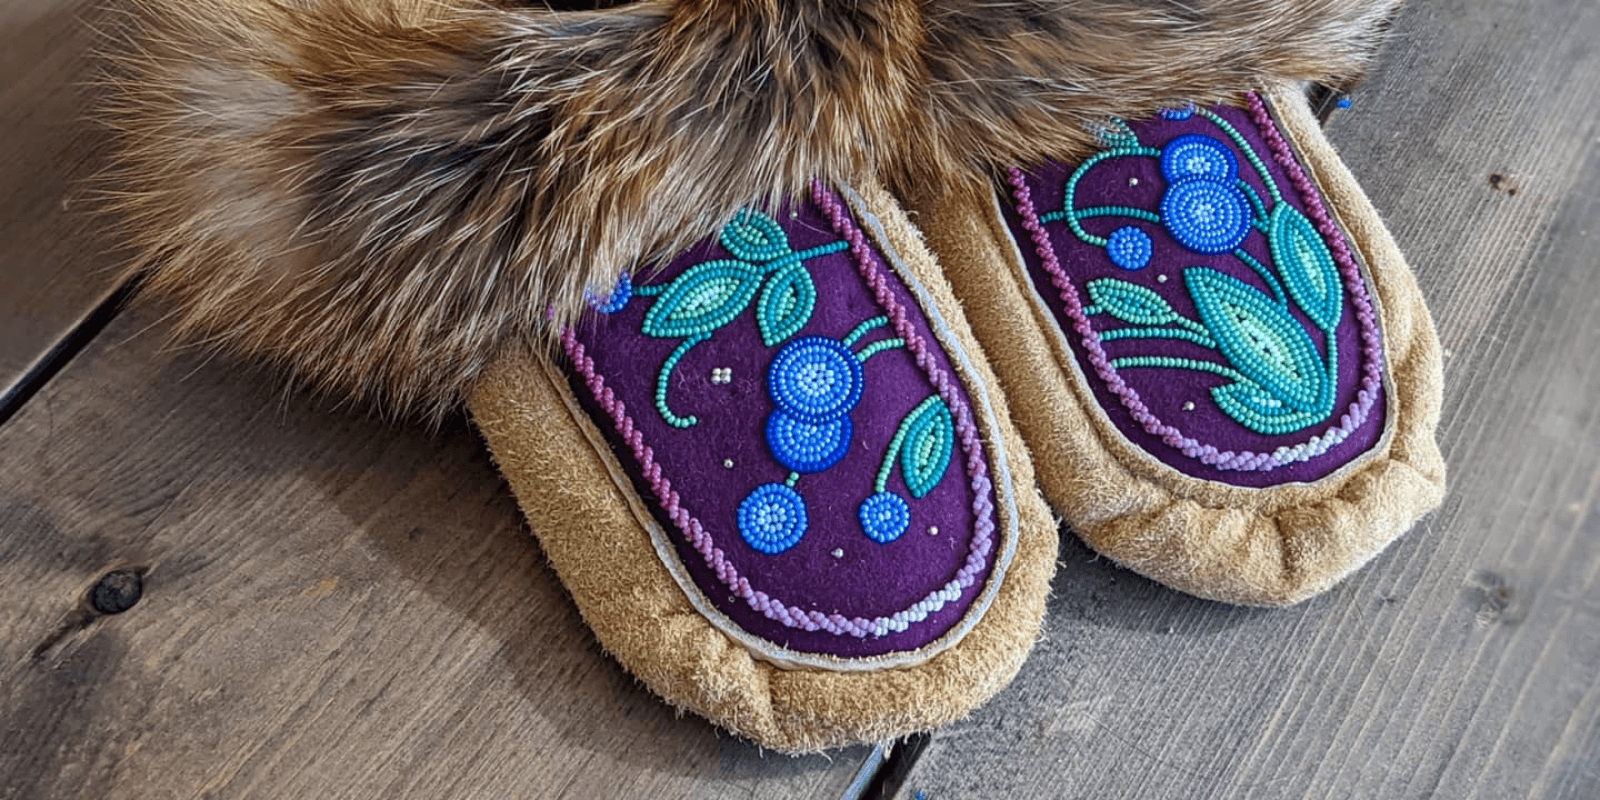 A pair of fur-lined moccasins adorned with green, blue and purple beads in a floral pattern. 